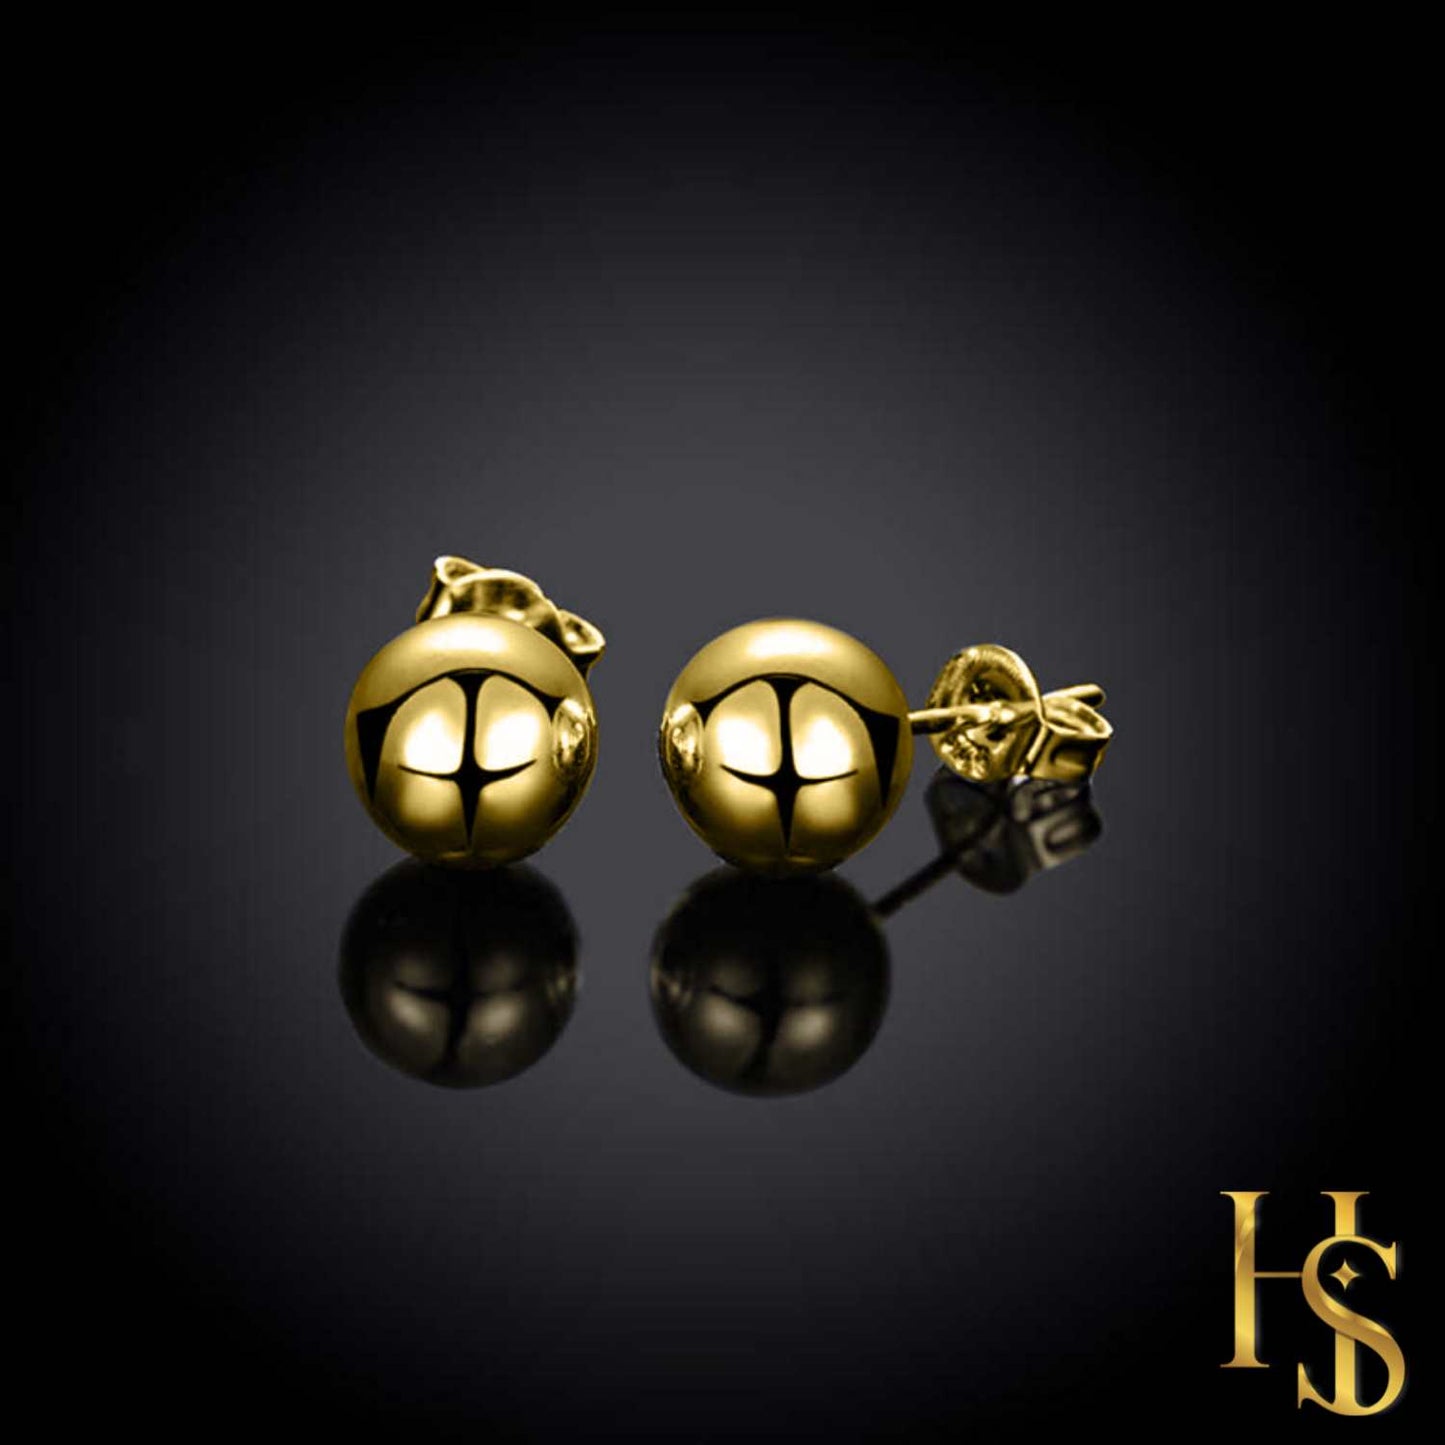 Gold Ball Earrings in Pure 92.5 Sterling Silver - Simple and elegant earrings in 18K Gold finish